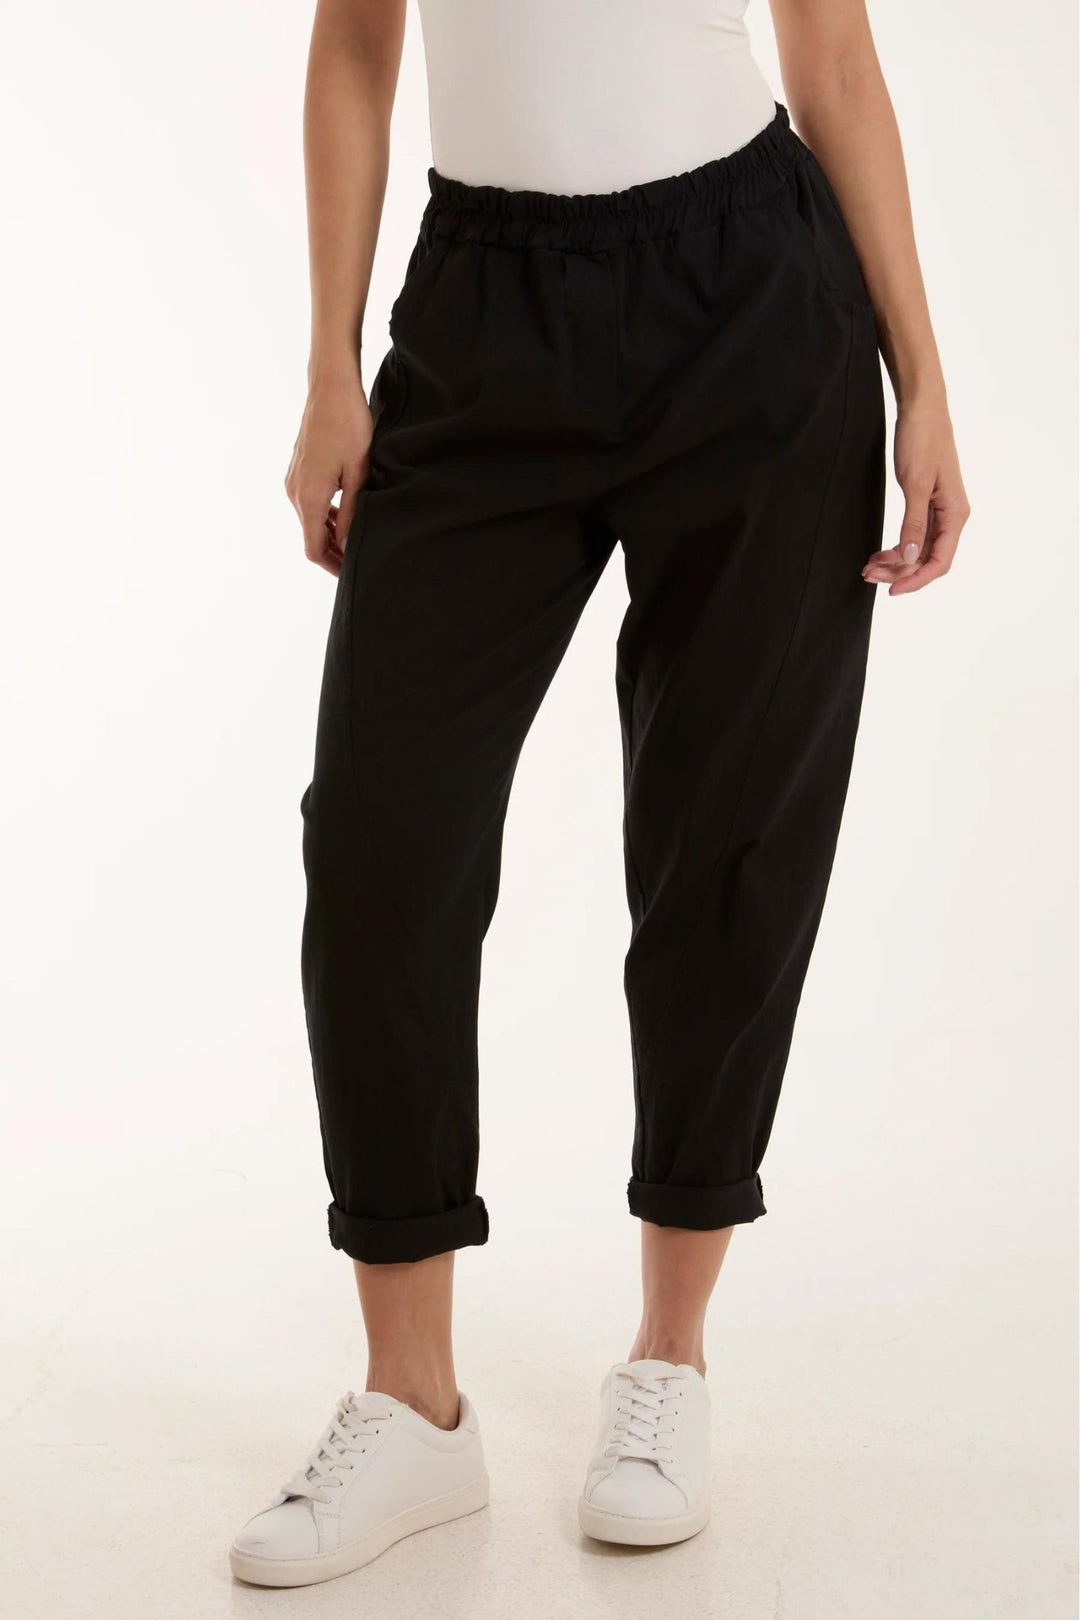 Black Contour Detail Stretch Pull-On Trousers XL